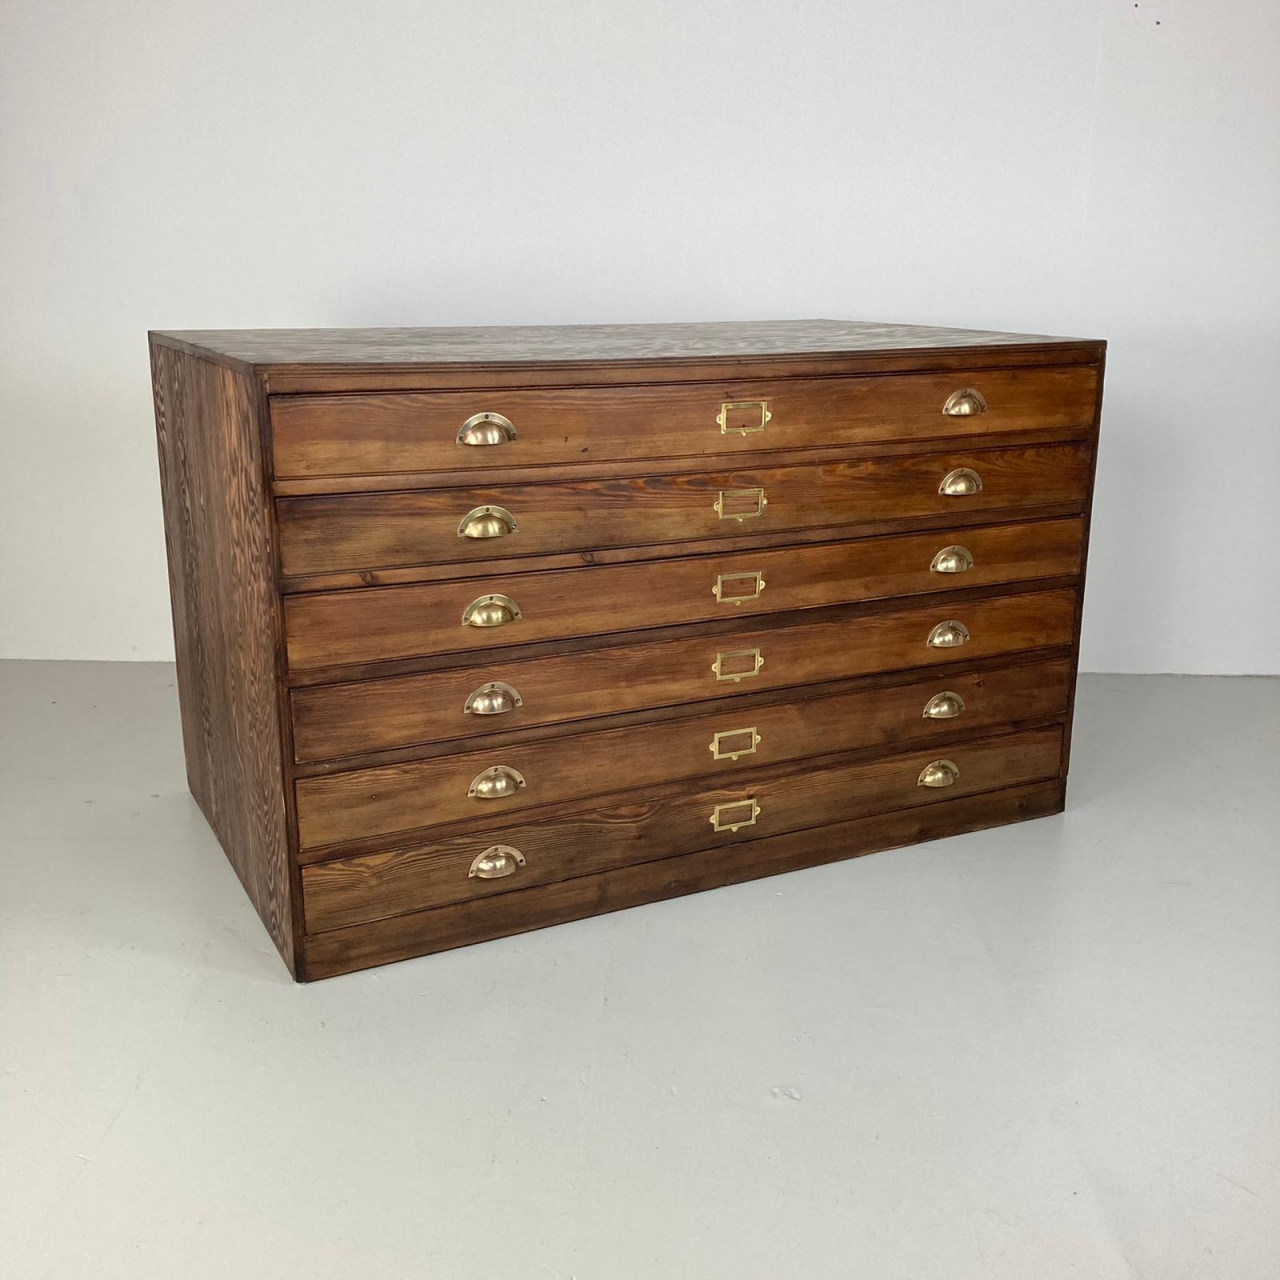 1930s large plan chest with brass cup handles